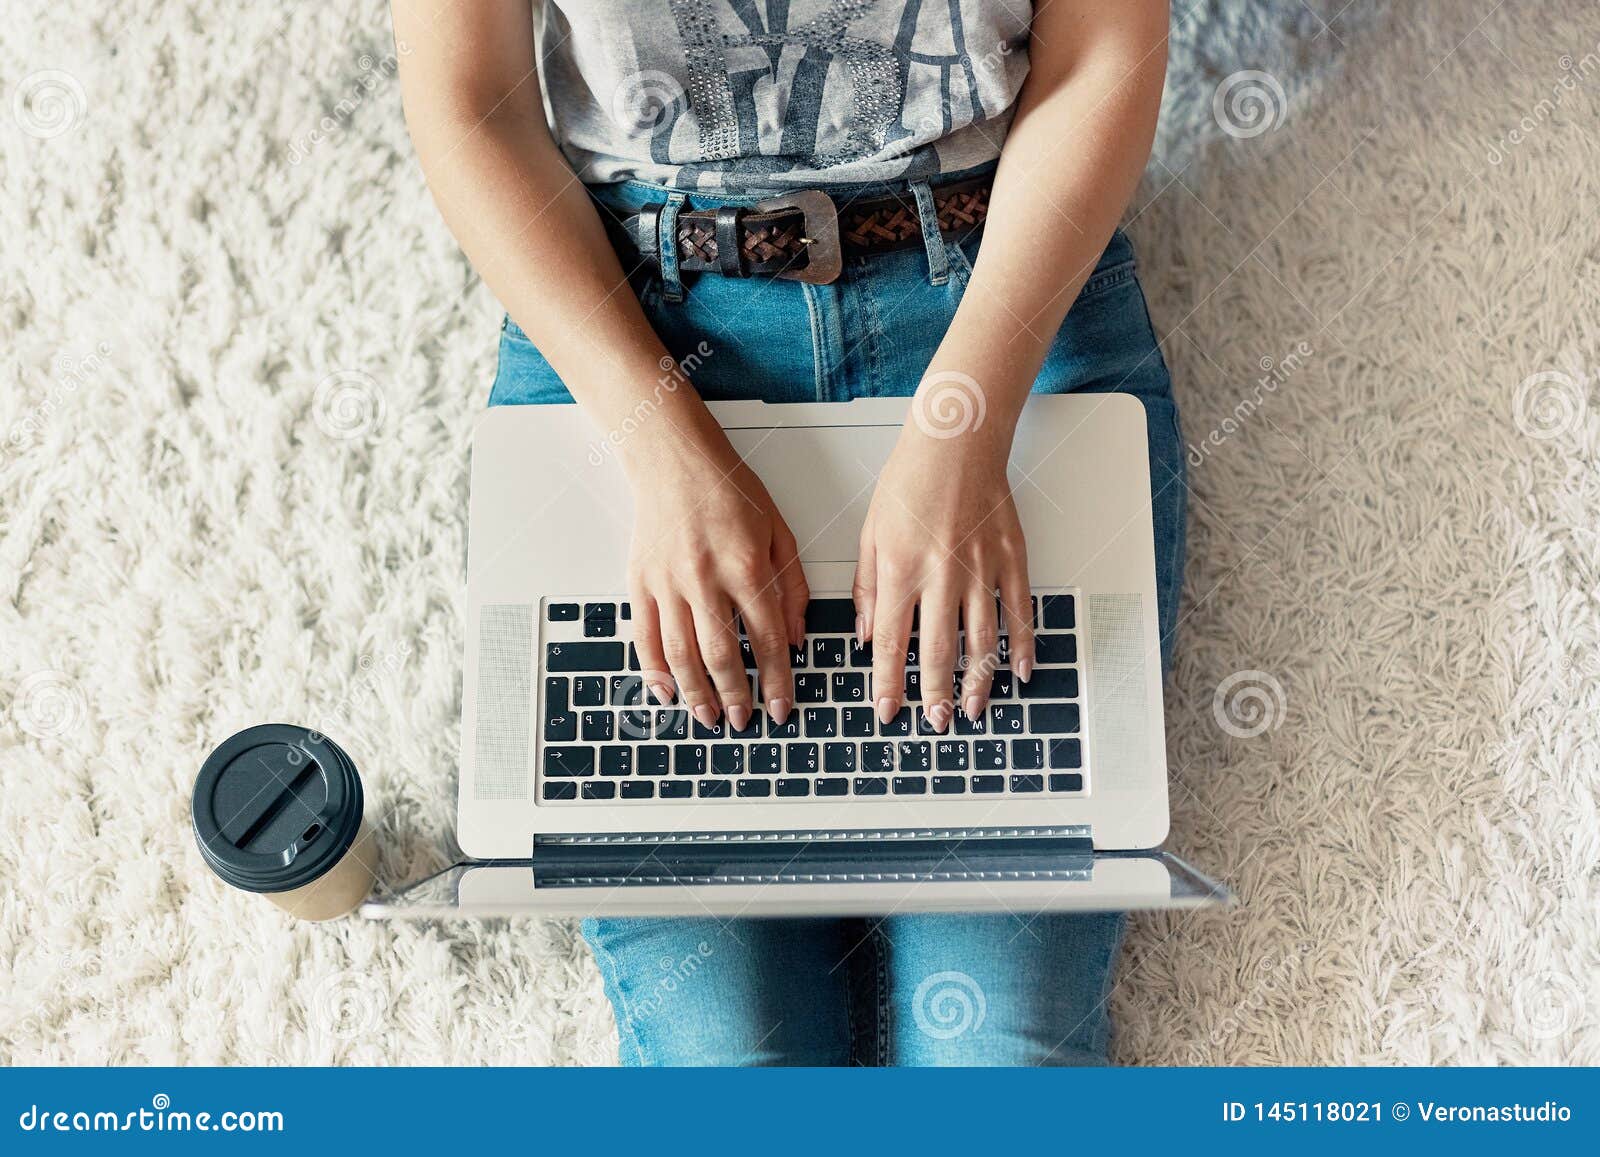 woman working on a laptop. female using a laptop sitting on floor, searching web, browsing information, having workplace at home.